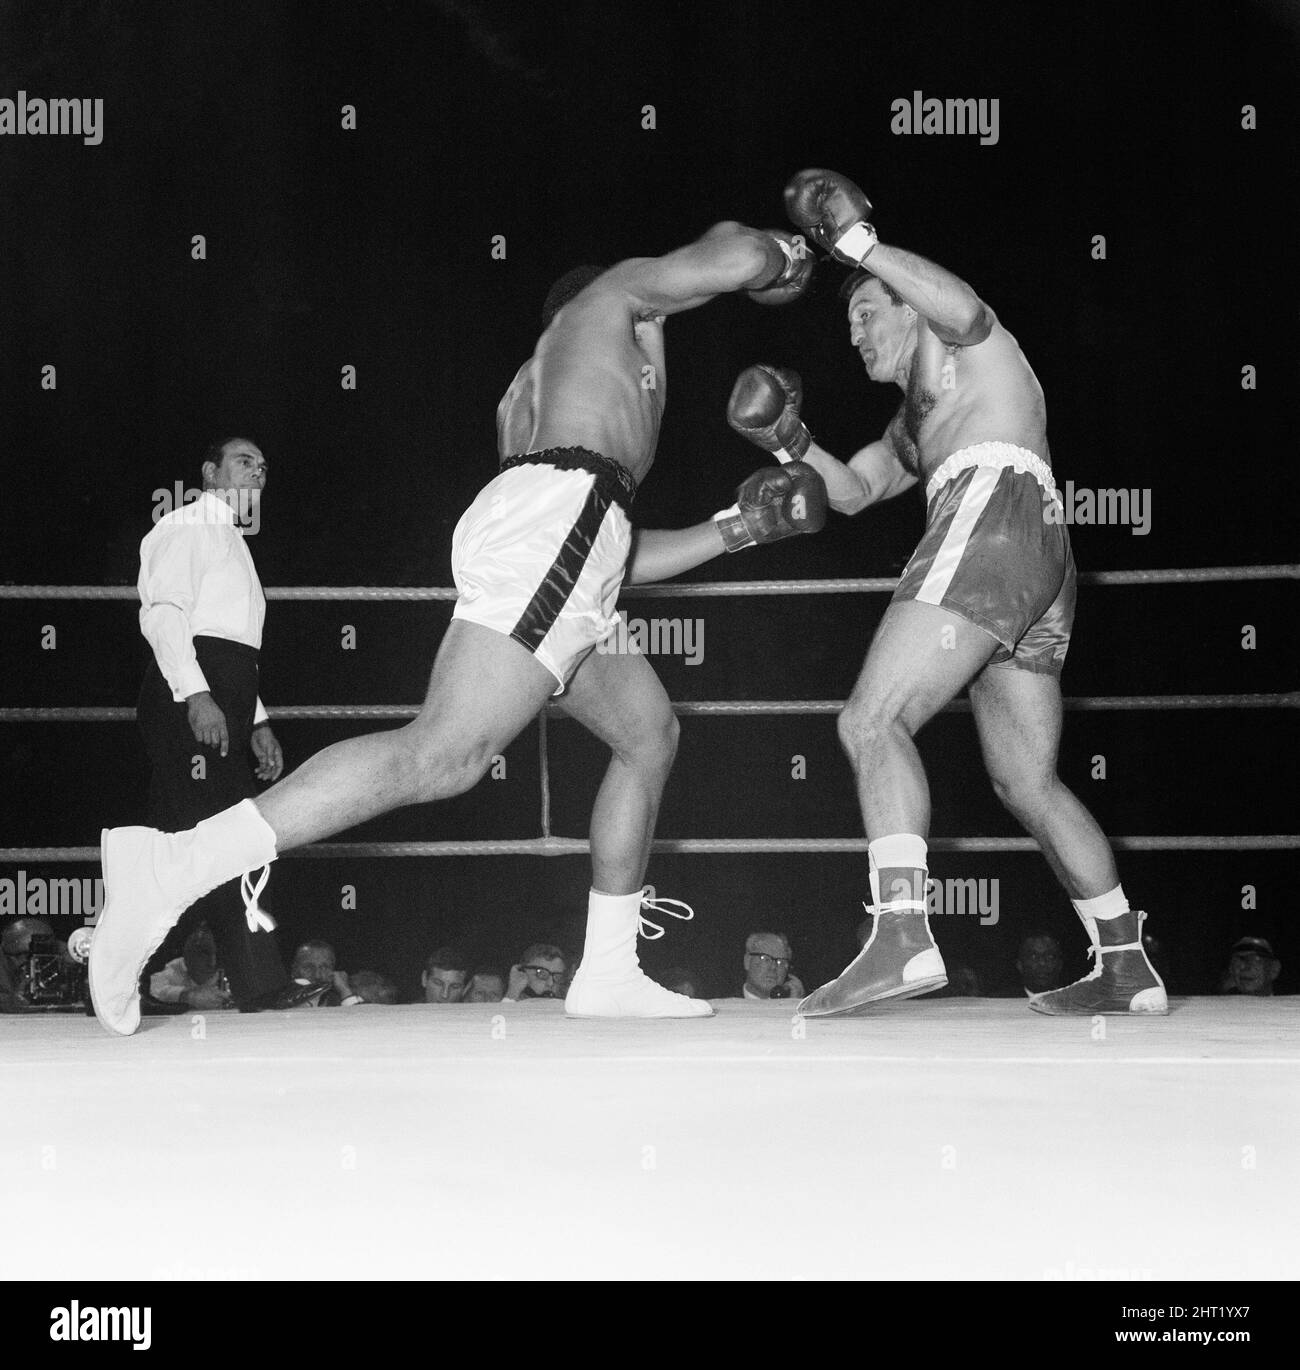 On August 6, 1966 at Earls Court Arena, Kensington, London, England, heavyweight champion Muhammad Ali, from Louisville, Kentucky, defended his title against Brian London, from Blackpool, England. Ali was undefeated at 24-0 coming in. London was 35-13. The fight was scheduled for 15 rounds. When asked if he wanted a rematch with Ali, London said, “Only if he ties a 56-pound weight to each leg…” Ali knocked-out London in the third round. (picture) Muhammad Ali unleashes an all-out assault on Brian London. Stock Photo